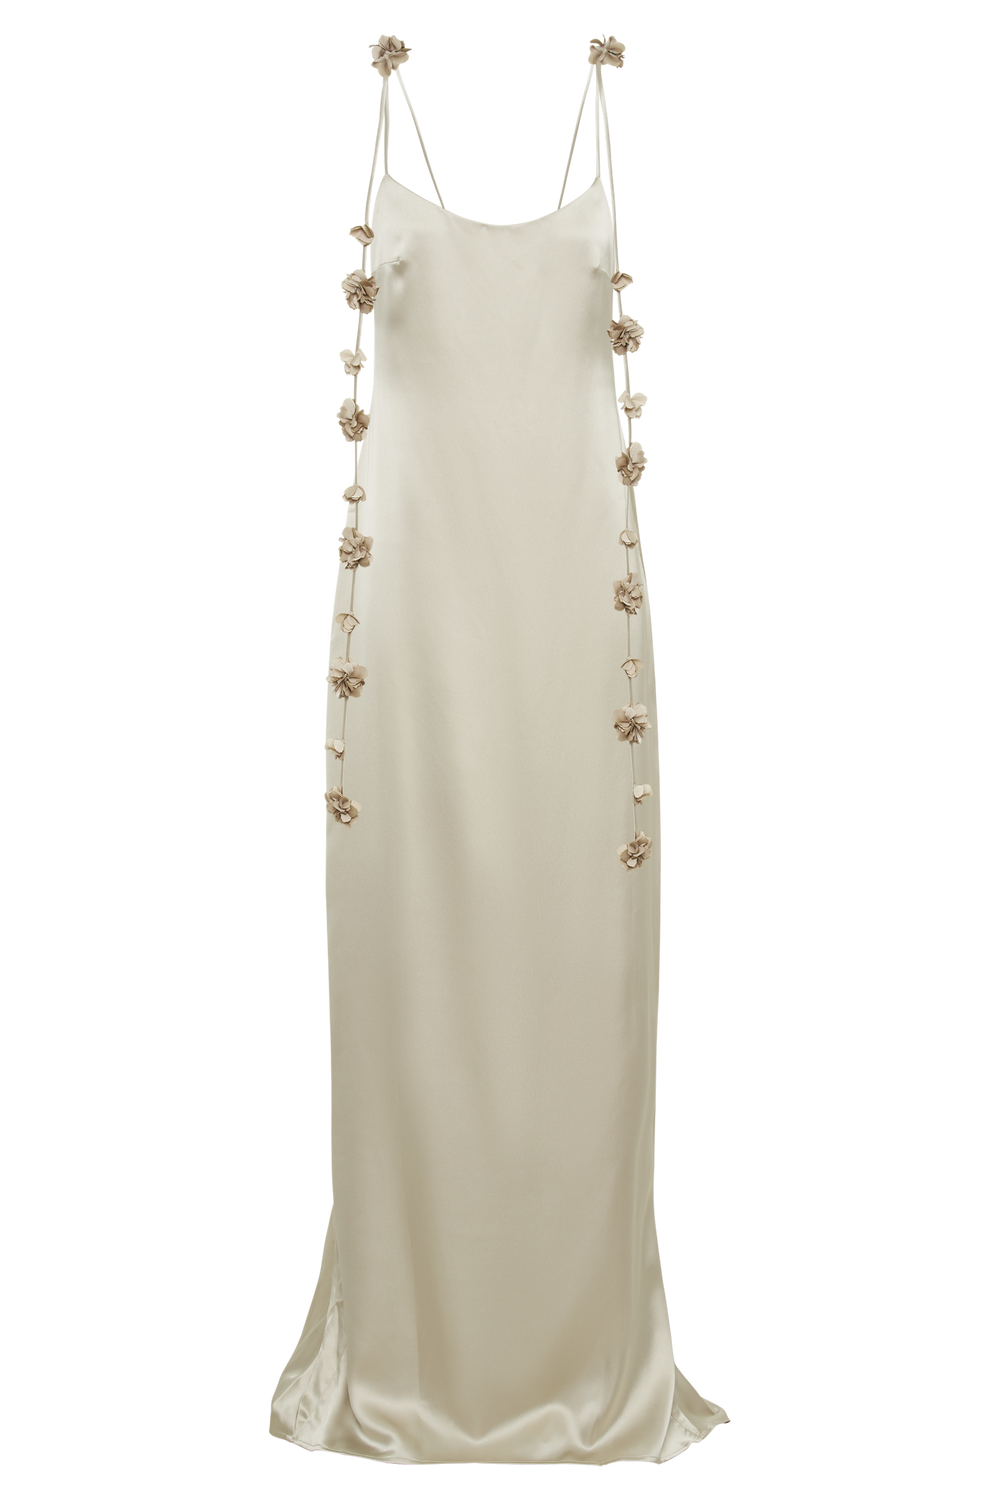 Elenora Rose Gown - Champagne